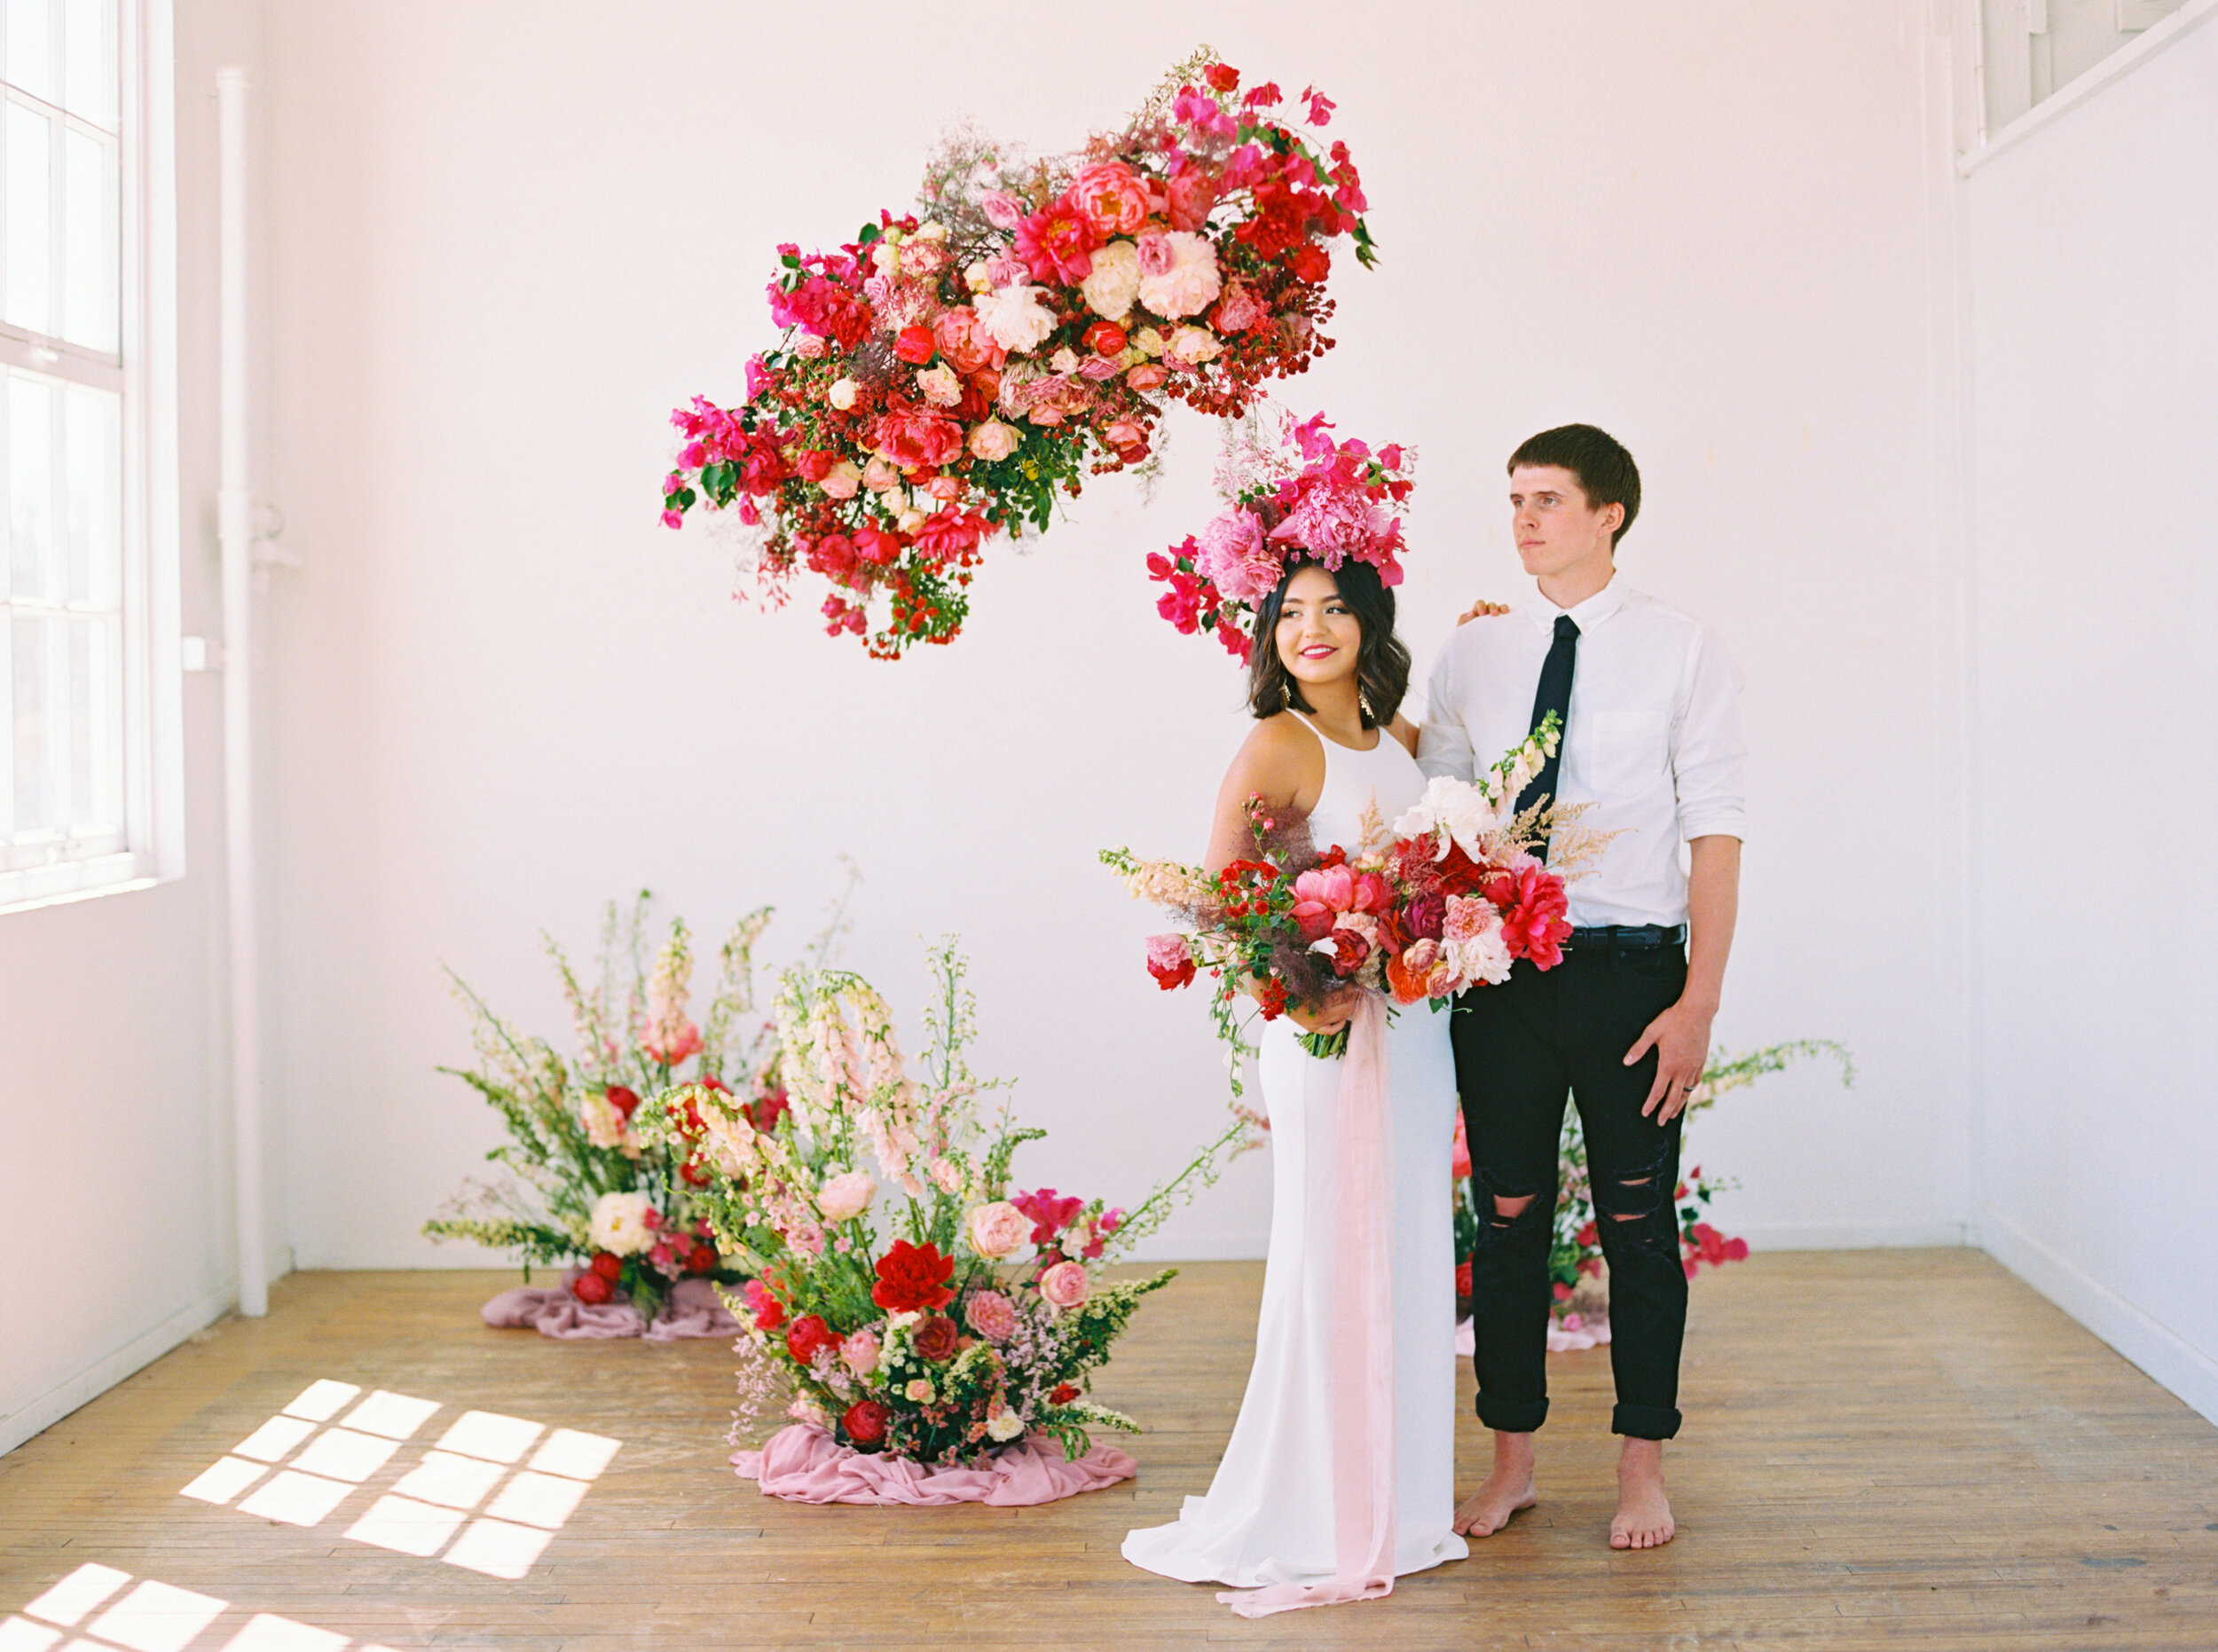 A Romantic Wedding Elopement Filled with Colorful Fuchsia - Sarahi Hadden Submission-51.jpg